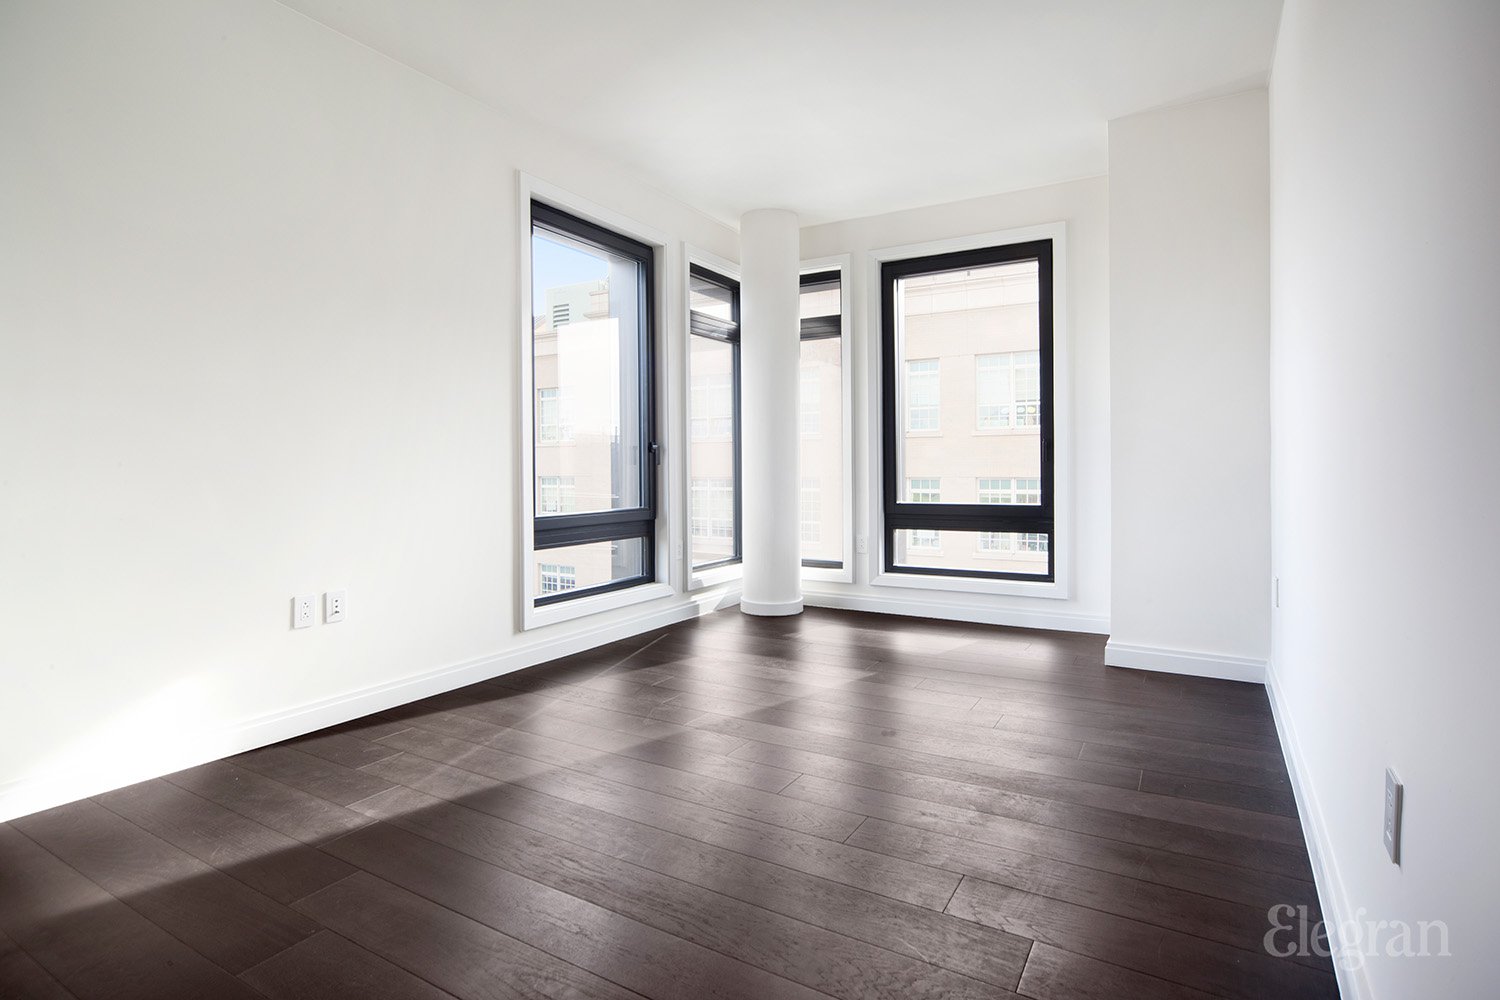 613 Baltic Street 6-E, Park Slope, Brooklyn, New York - 3 Bedrooms  
3 Bathrooms  
5 Rooms - 